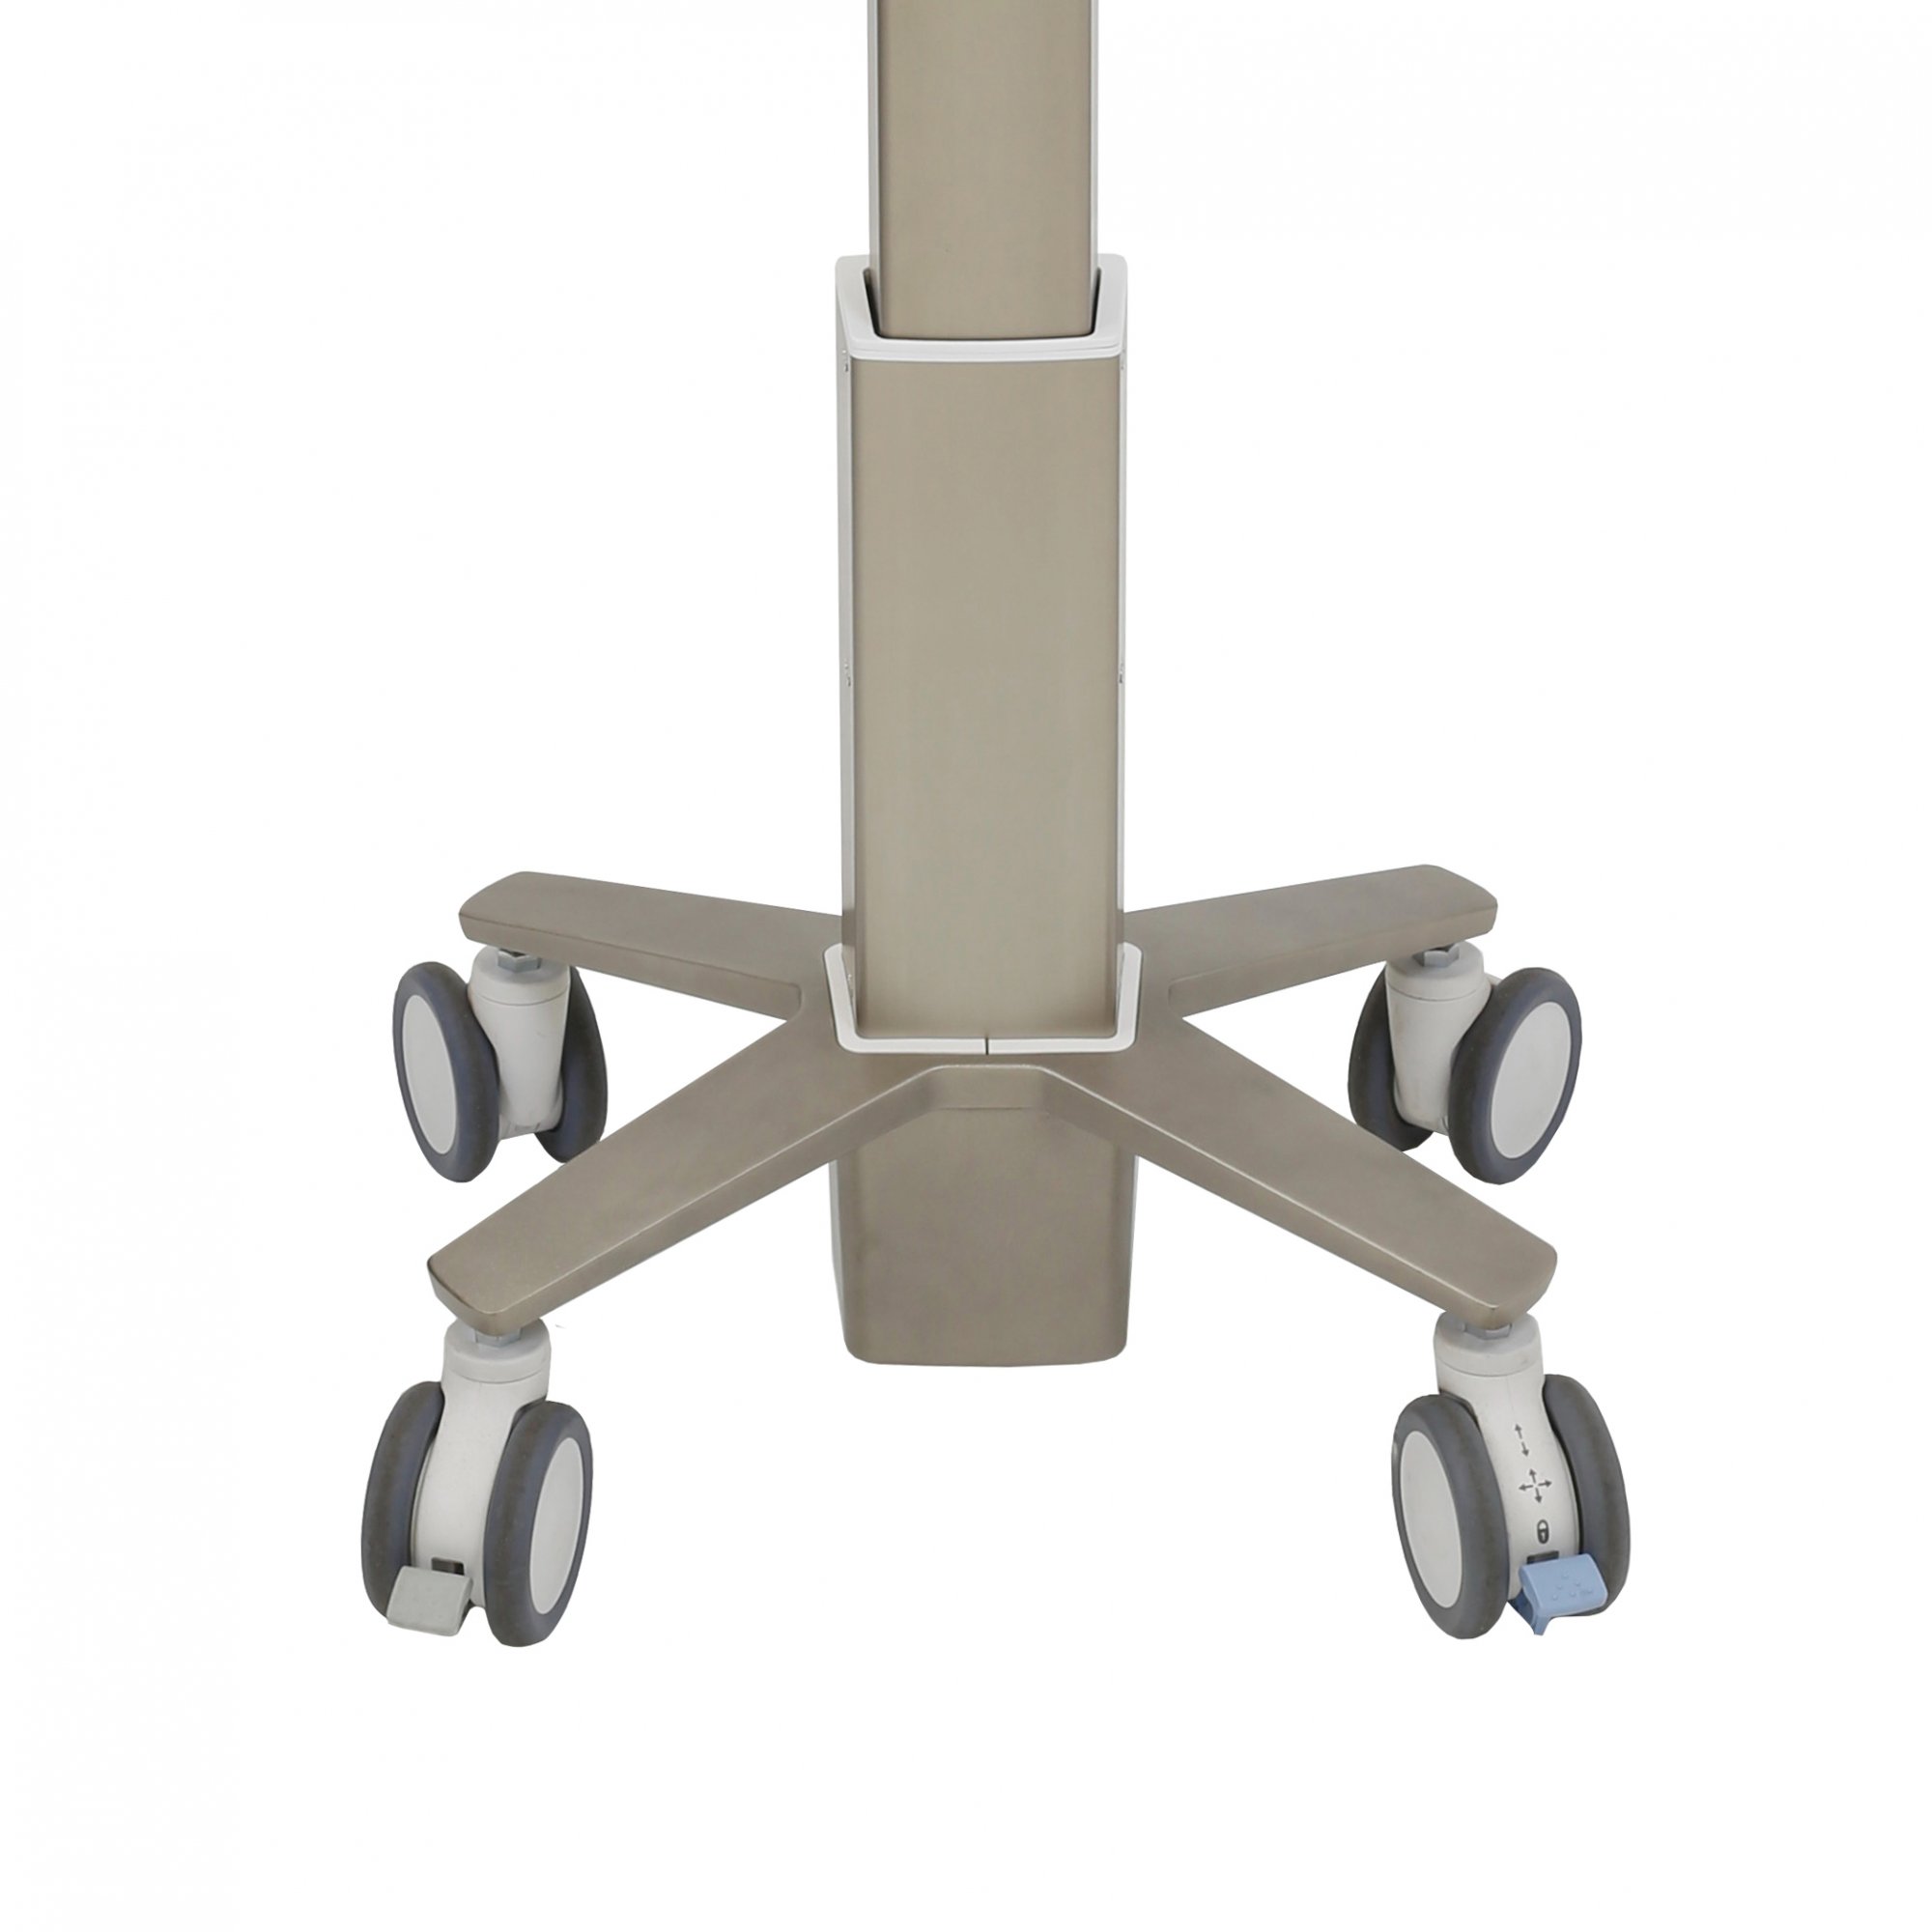 Four ultra-smooth 4" gliding casters for extremely easy push/pull mobility; two locking casters ensure lock-in-place stability; one 3-function tracking caster improves maneuverability